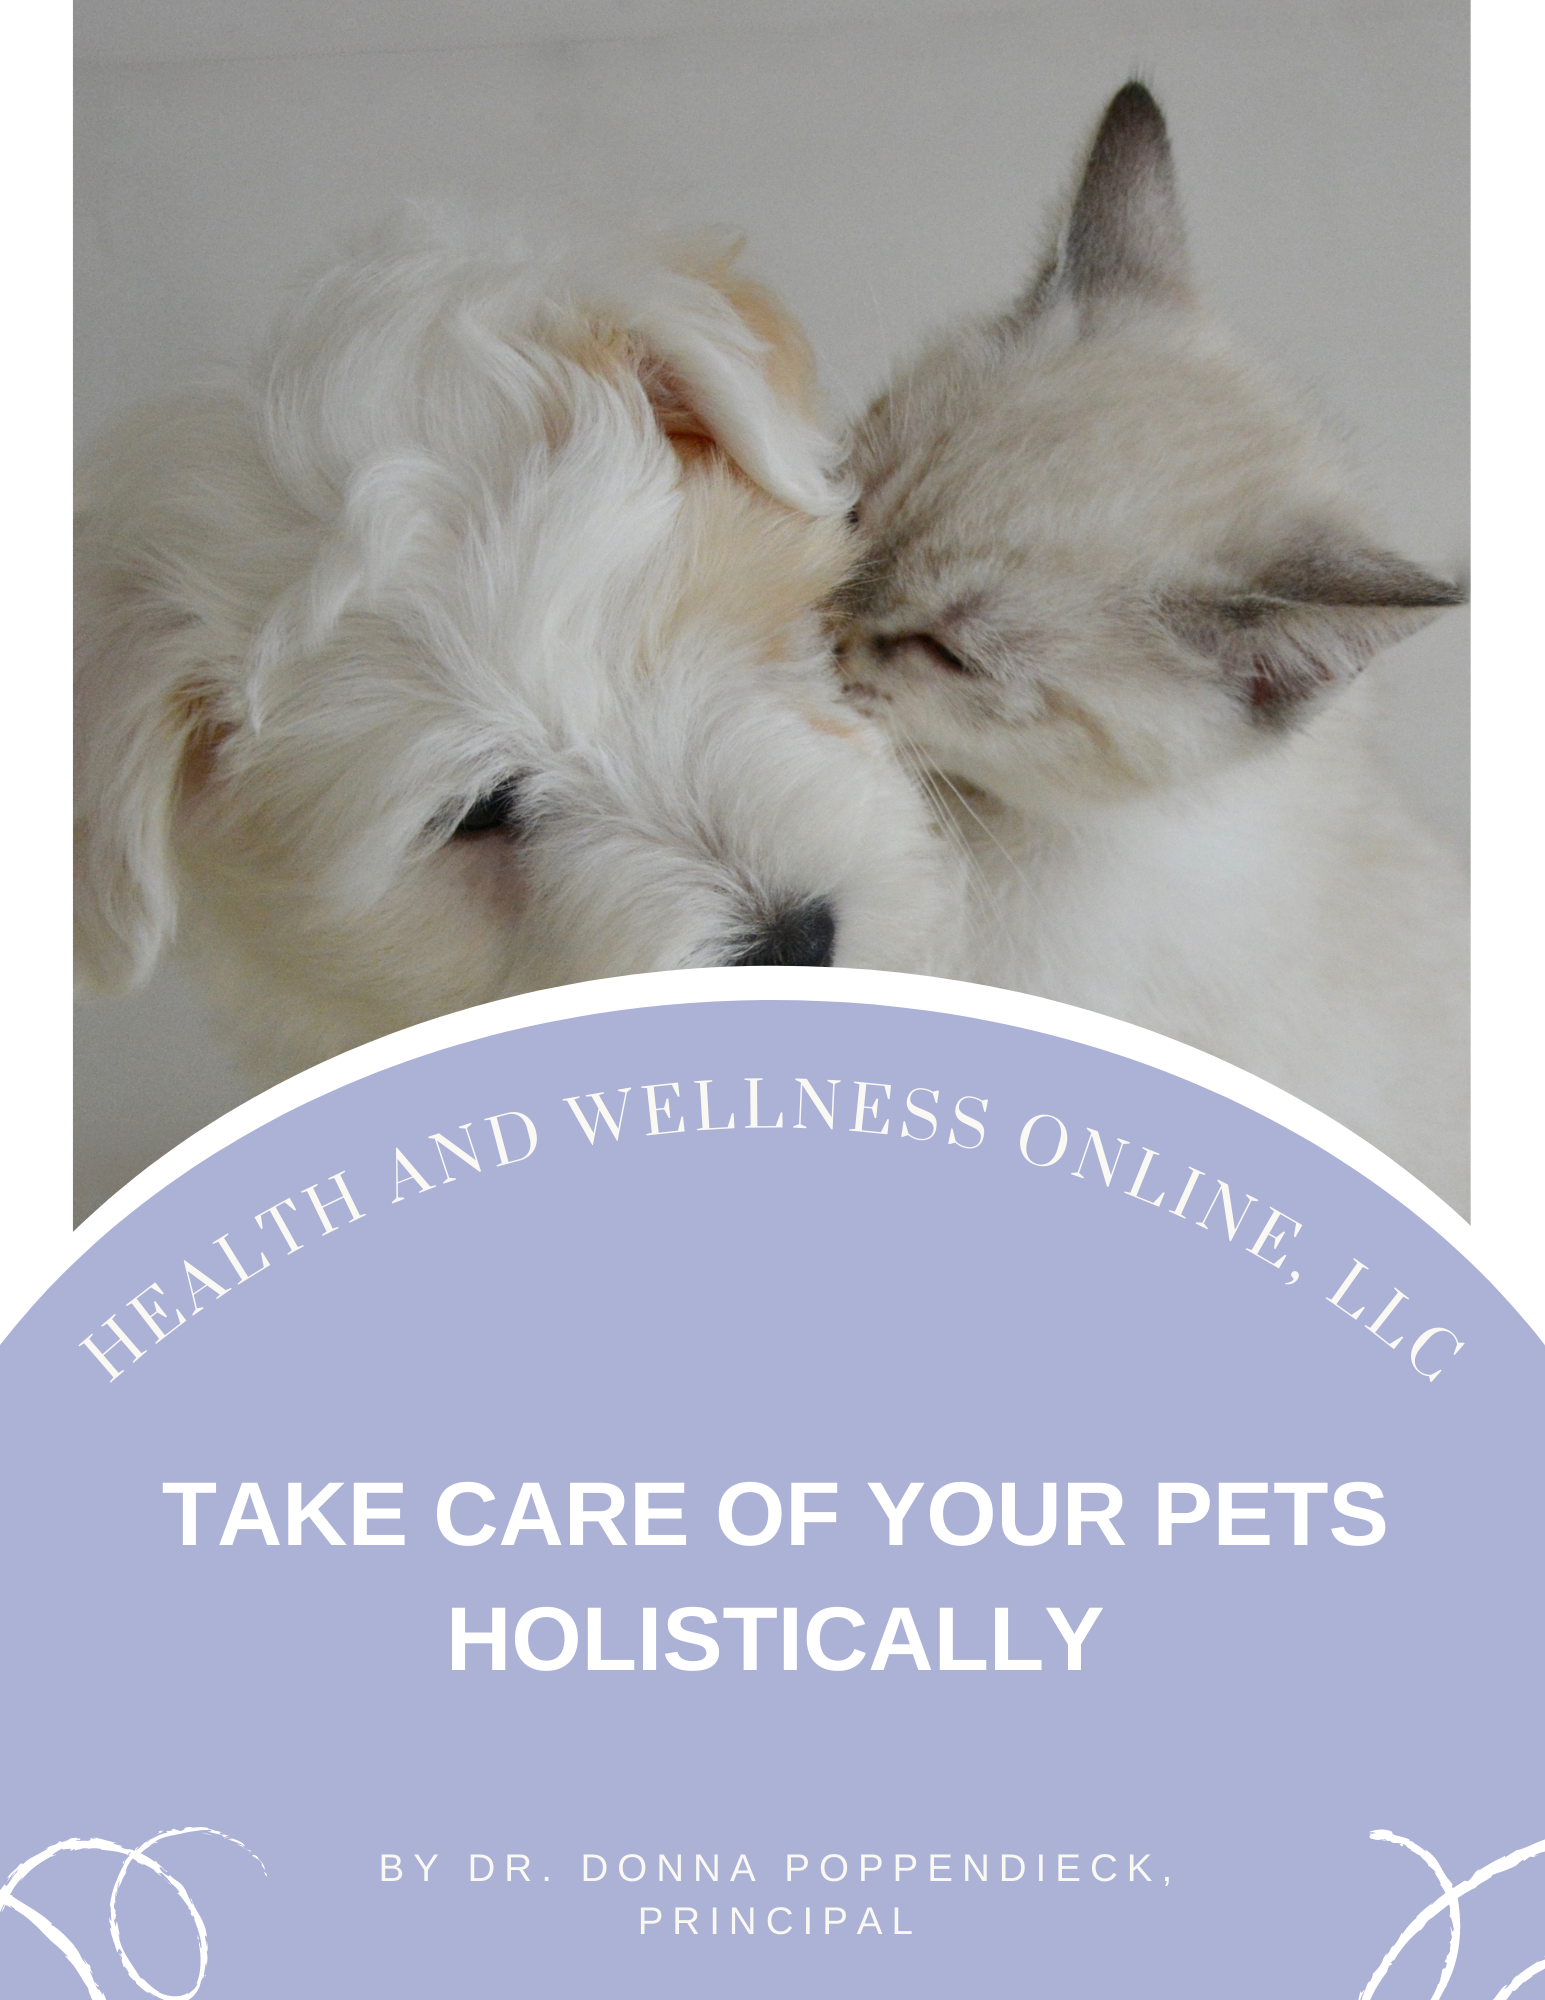 Take Care of Your Pets Holistically is a Course by Dr. Donna Poppendieck from Health and Wellness Online.